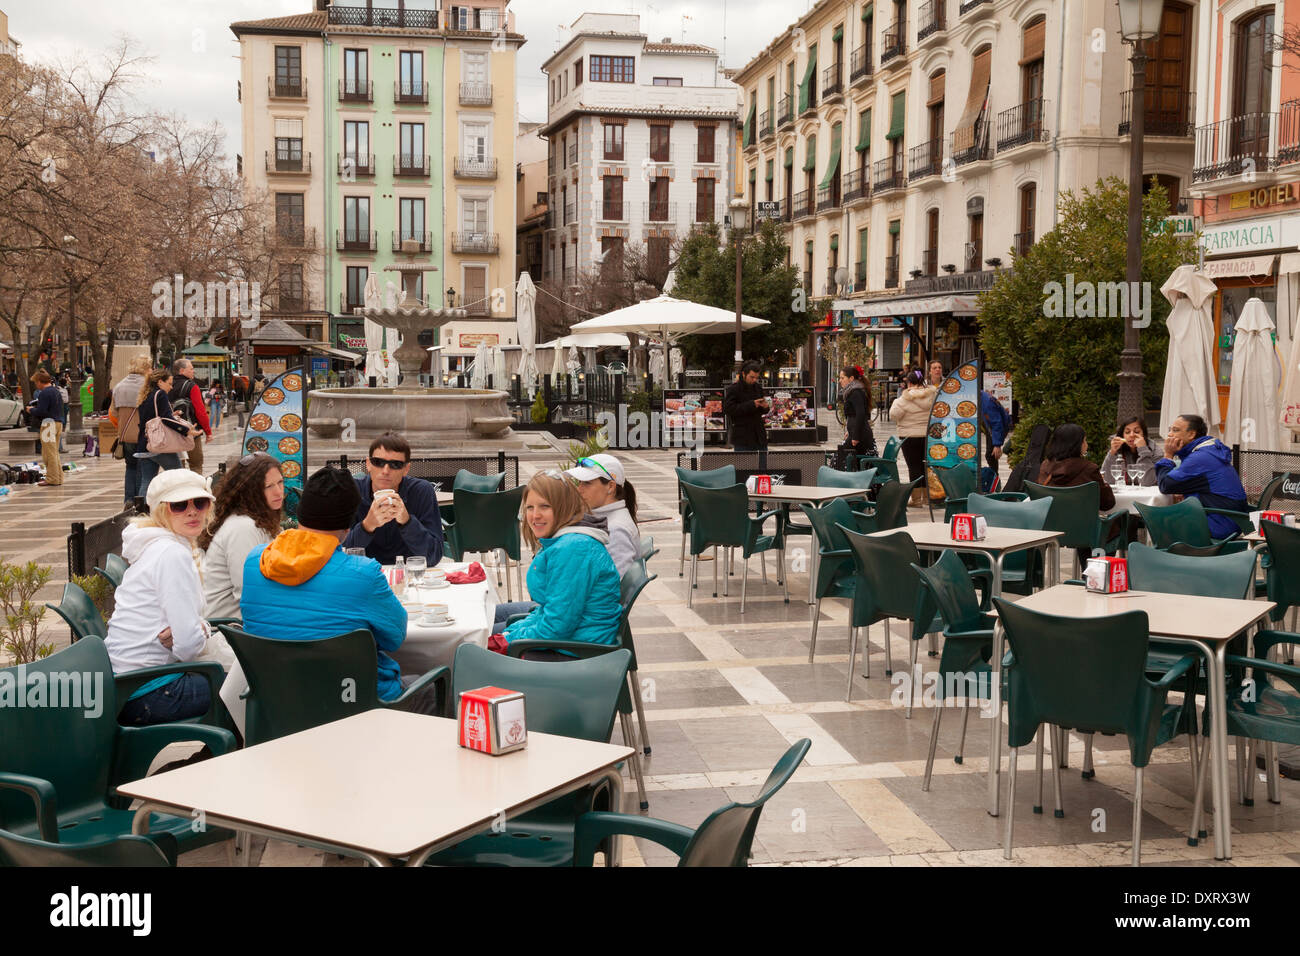 People sitting at an outdoor cafe, Plaza Nueva, Granada Andalusia Spain Europe Stock Photo